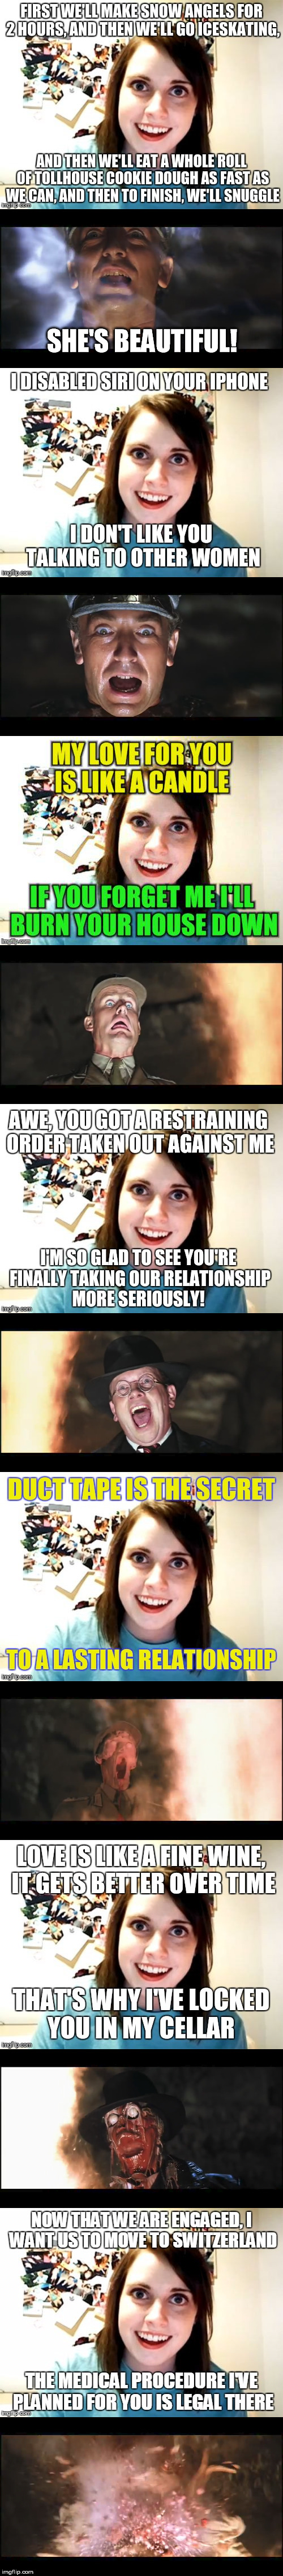 Wasn't a Great Idea | SHE'S BEAUTIFUL! | image tagged in memes,wasn't a great idea,overly attached girlfriend,indiana jones,nazis,new template | made w/ Imgflip meme maker